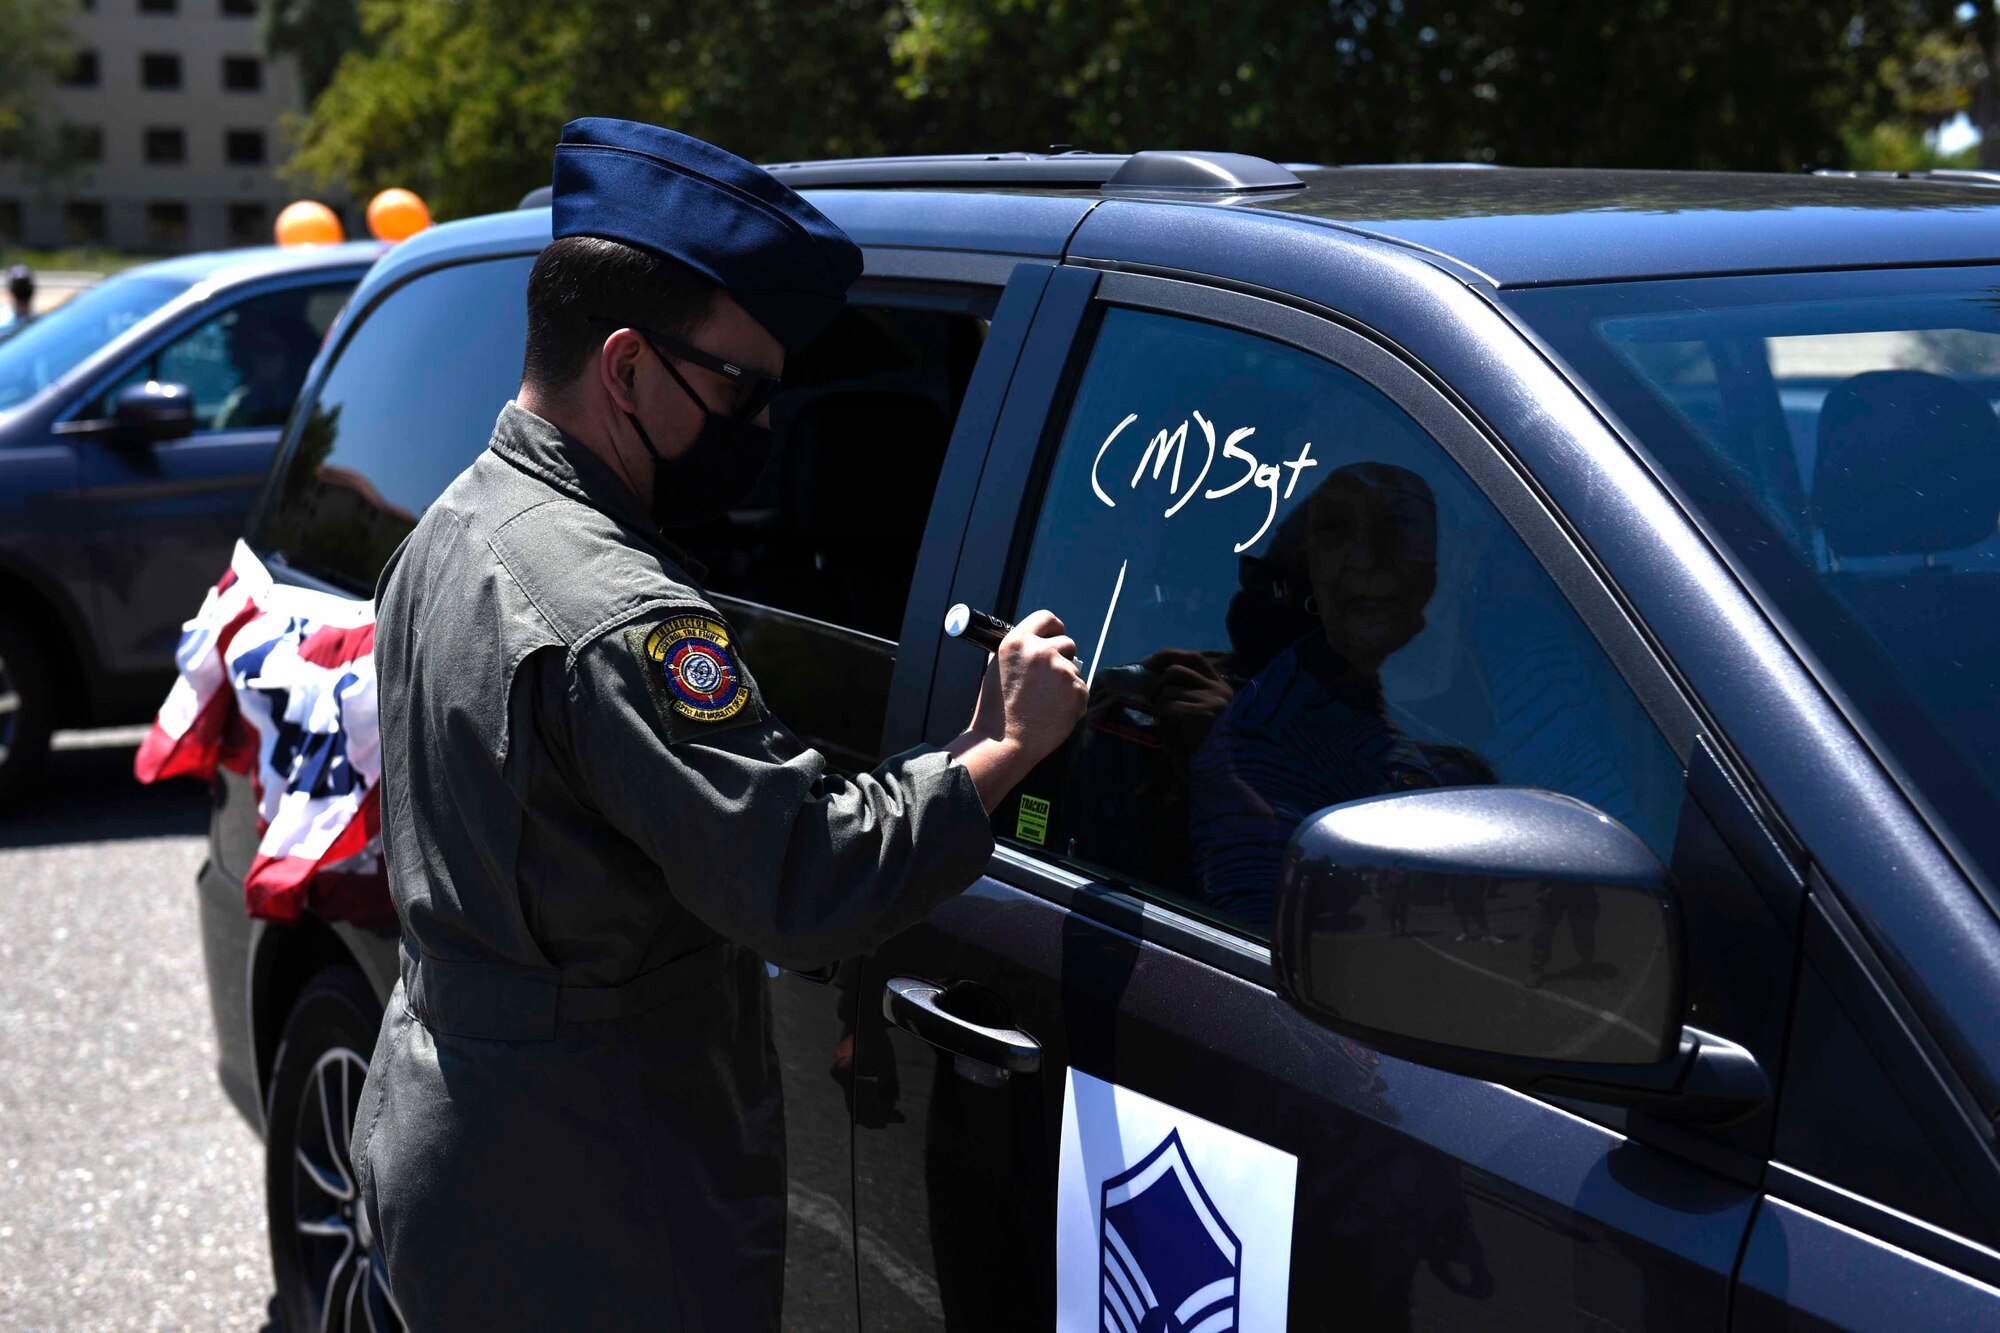 U.S. Air Force Tech. Sgt. Wes Nesting, 321st Air Mobility Operations Squadron aeromedical evacuation controller, decorates his car during a master sergeant release celebration July 23, 2020, at Travis Air Force Base, California. Travis AFB Airmen selected for promotion to master sergeant celebrated by participating in a parade in order to adhere to COVID-19 social distancing guidelines. (U.S. Air Force photo by Airman 1st Class Cameron Otte)